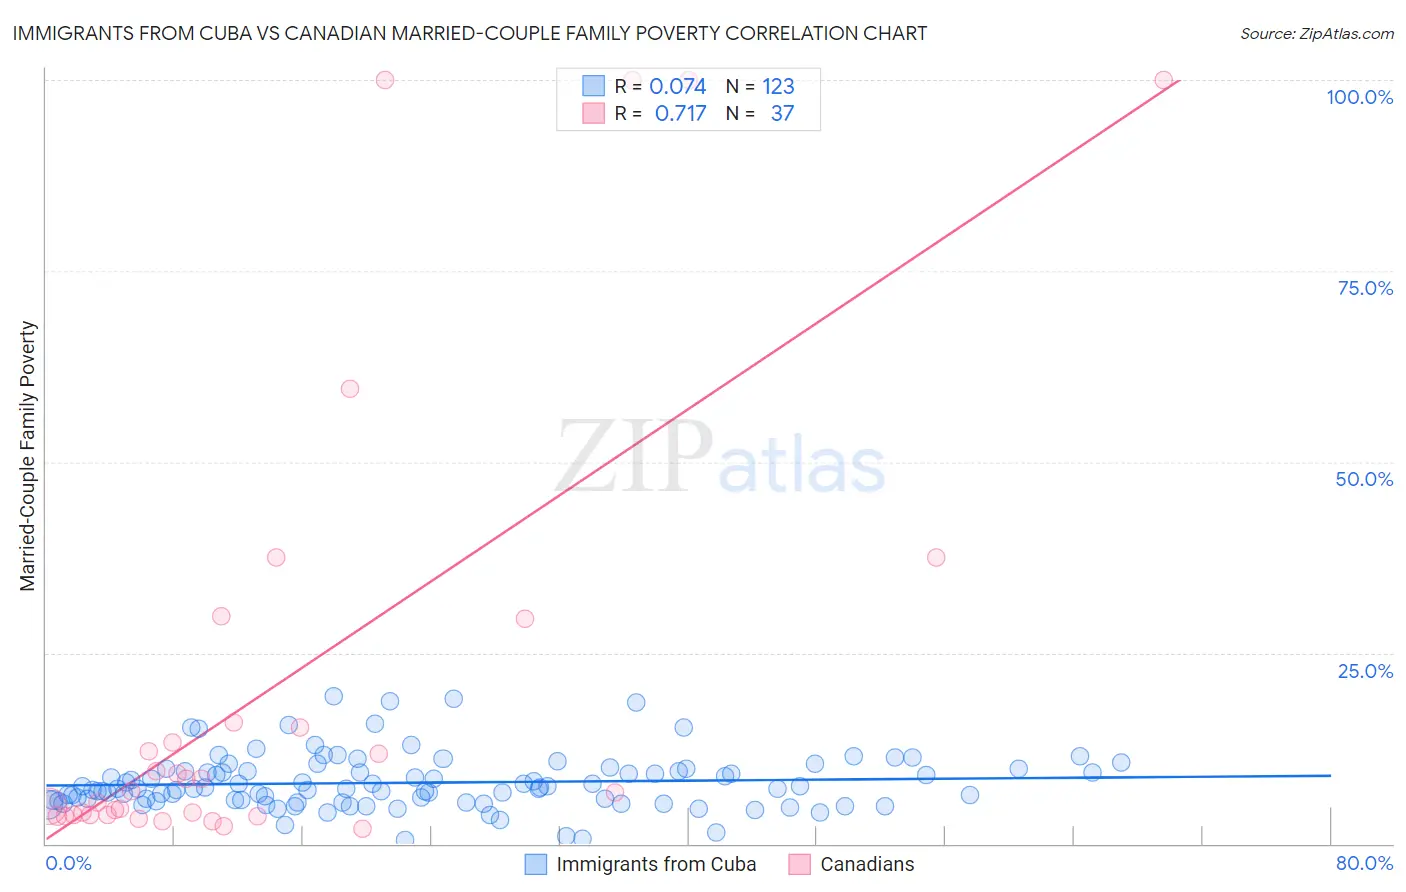 Immigrants from Cuba vs Canadian Married-Couple Family Poverty